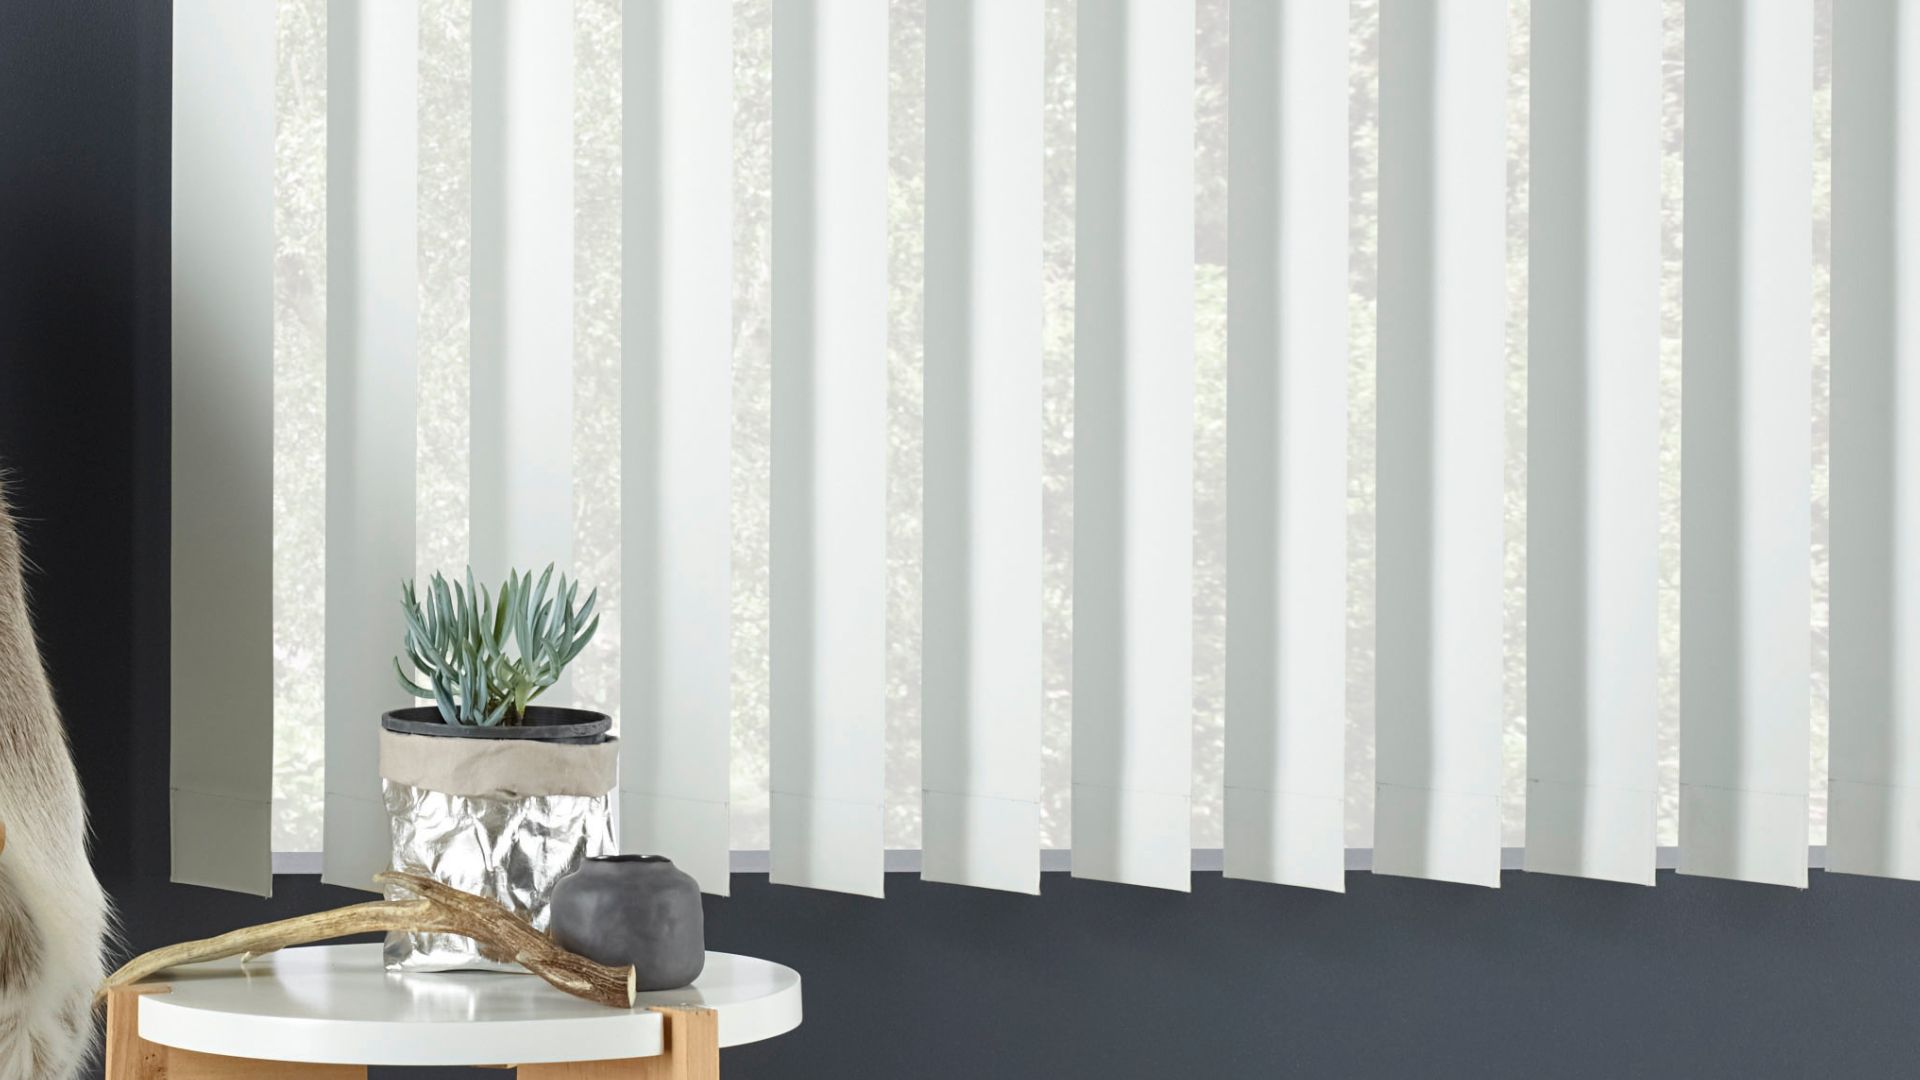 Classic white vertical blinds